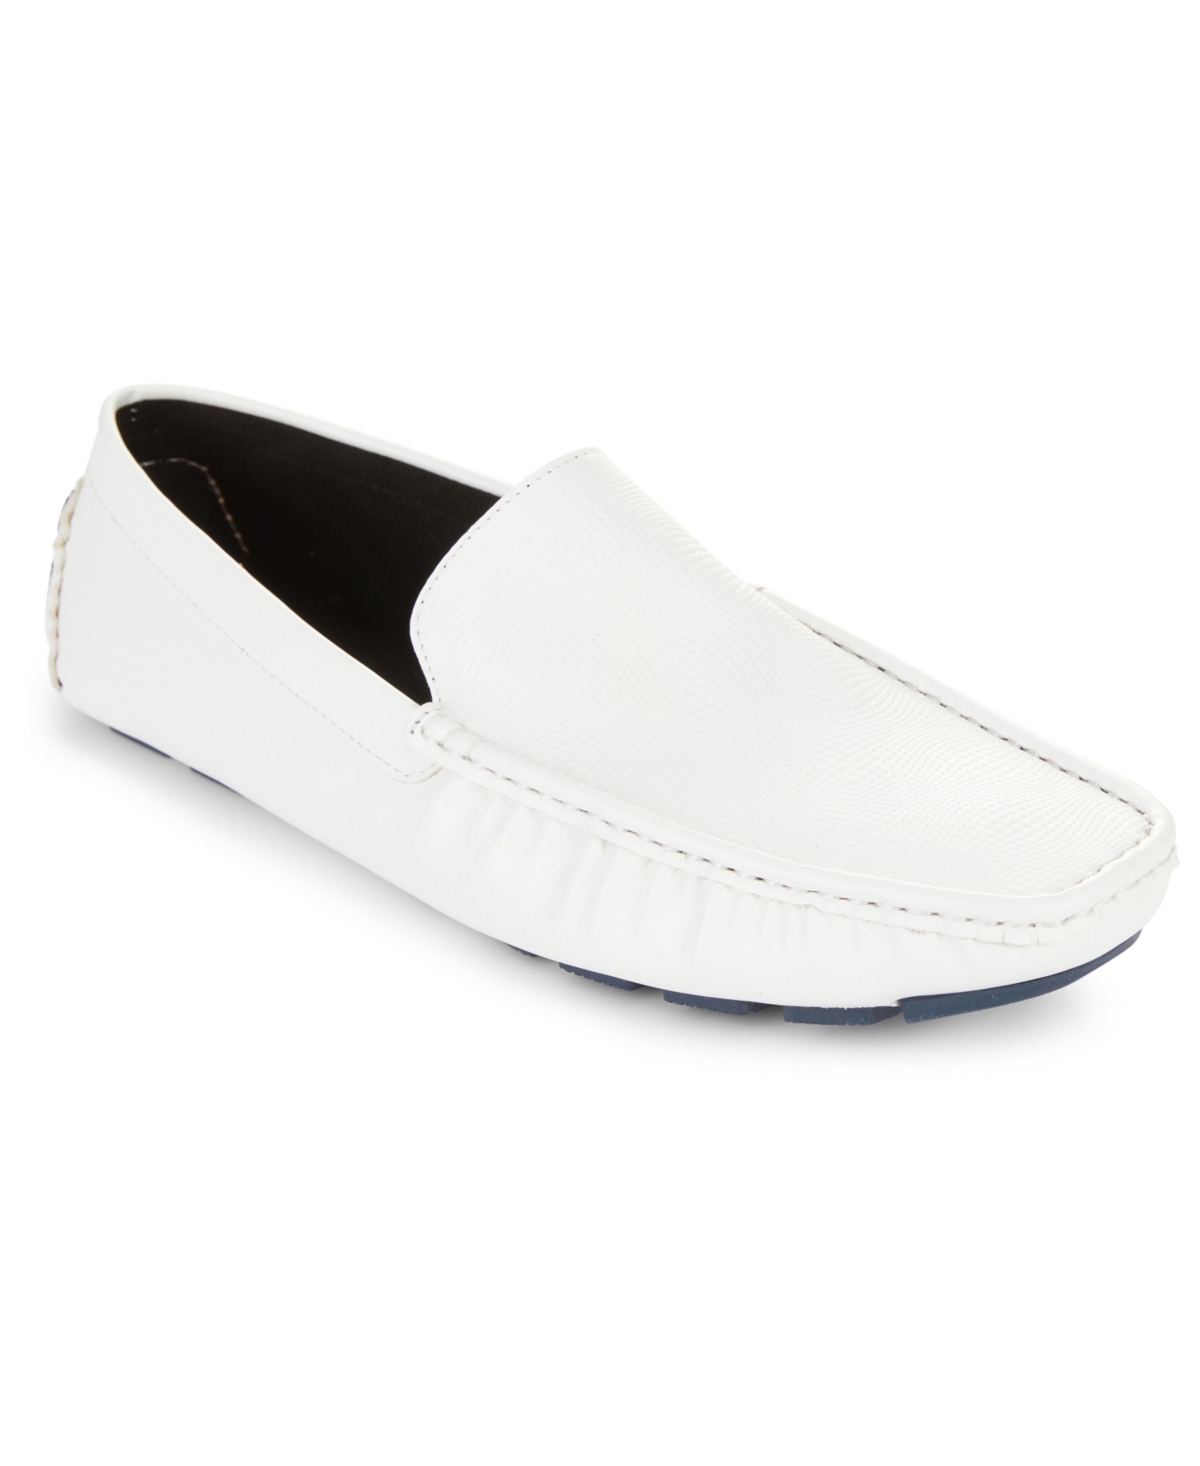 Unlisted Men's Sound Textured Slip-on Driving Loafers In White